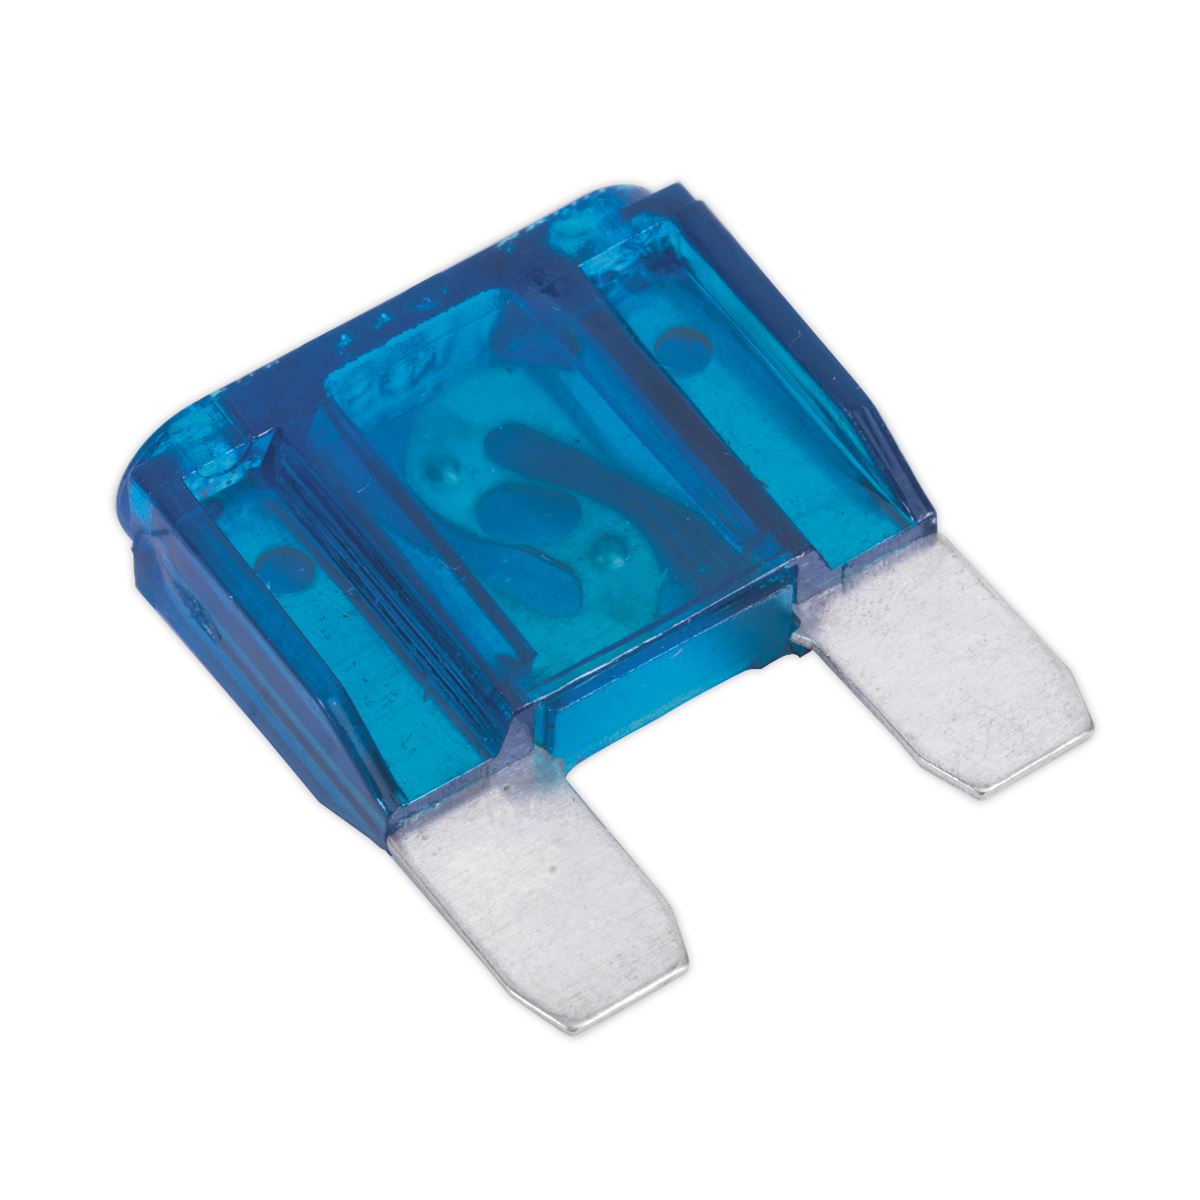 Sealey Automotive MAXI Blade Fuse 60A Pack of 10